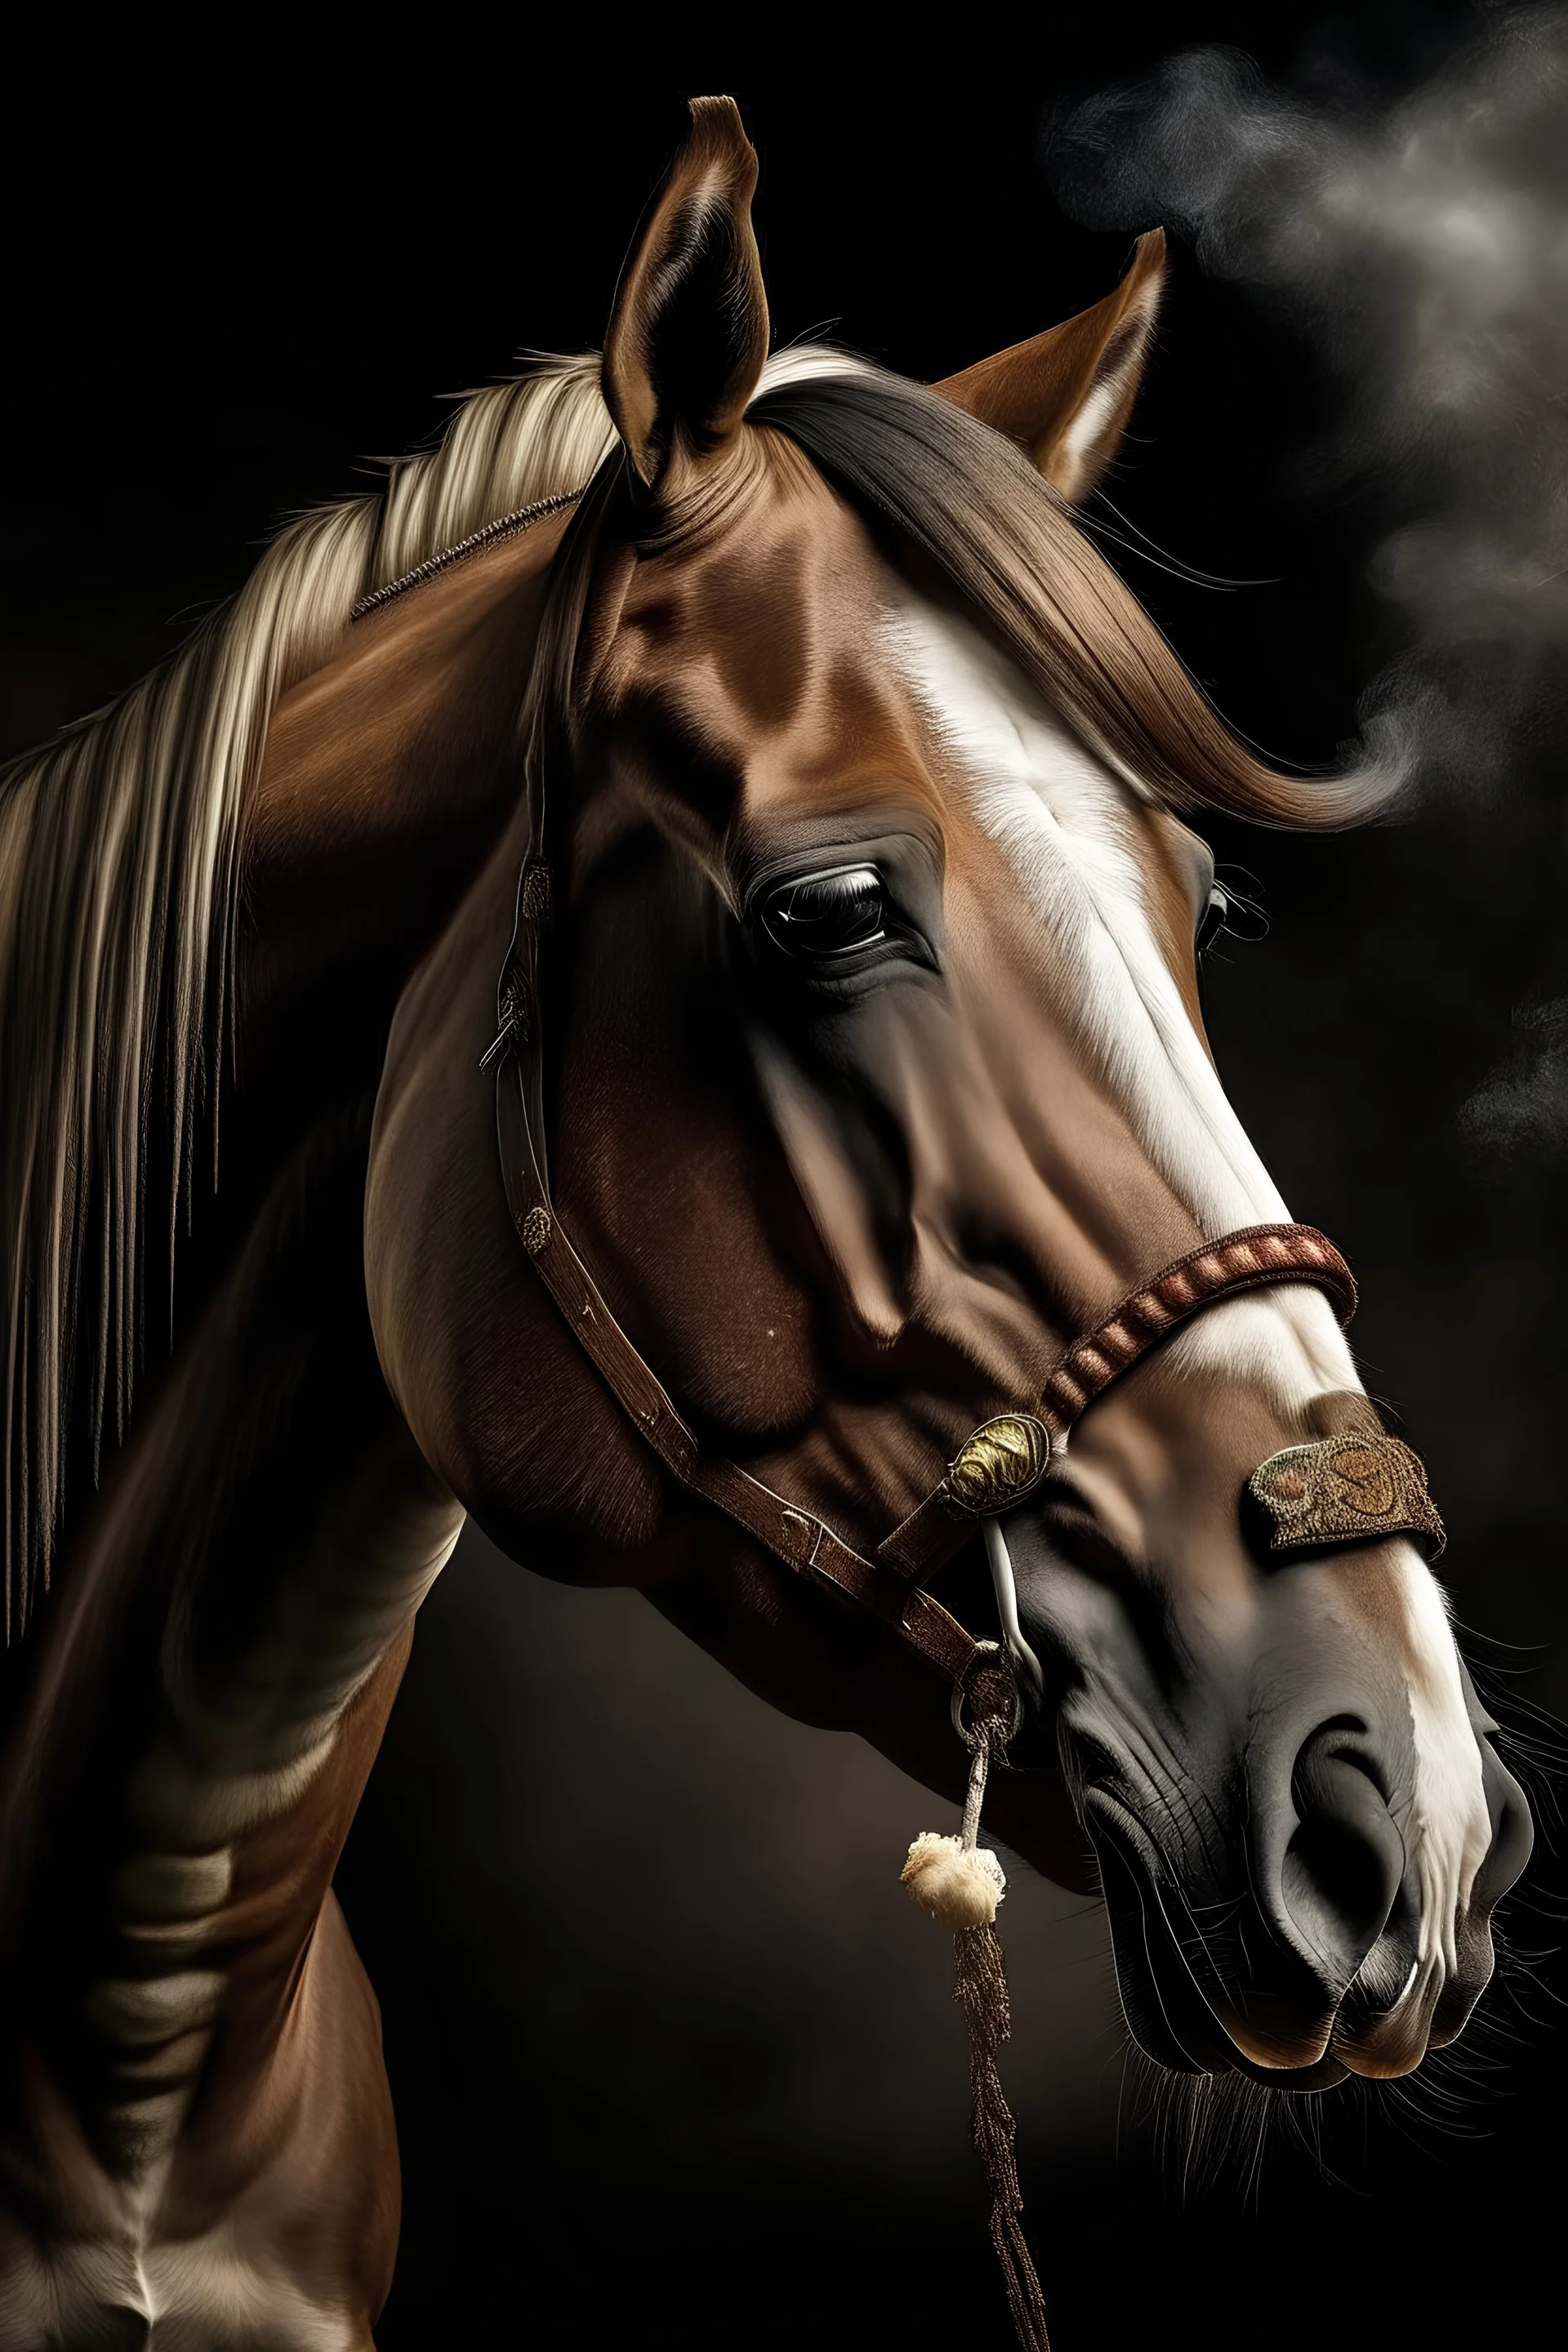 A dope looking horse smoking a cigar